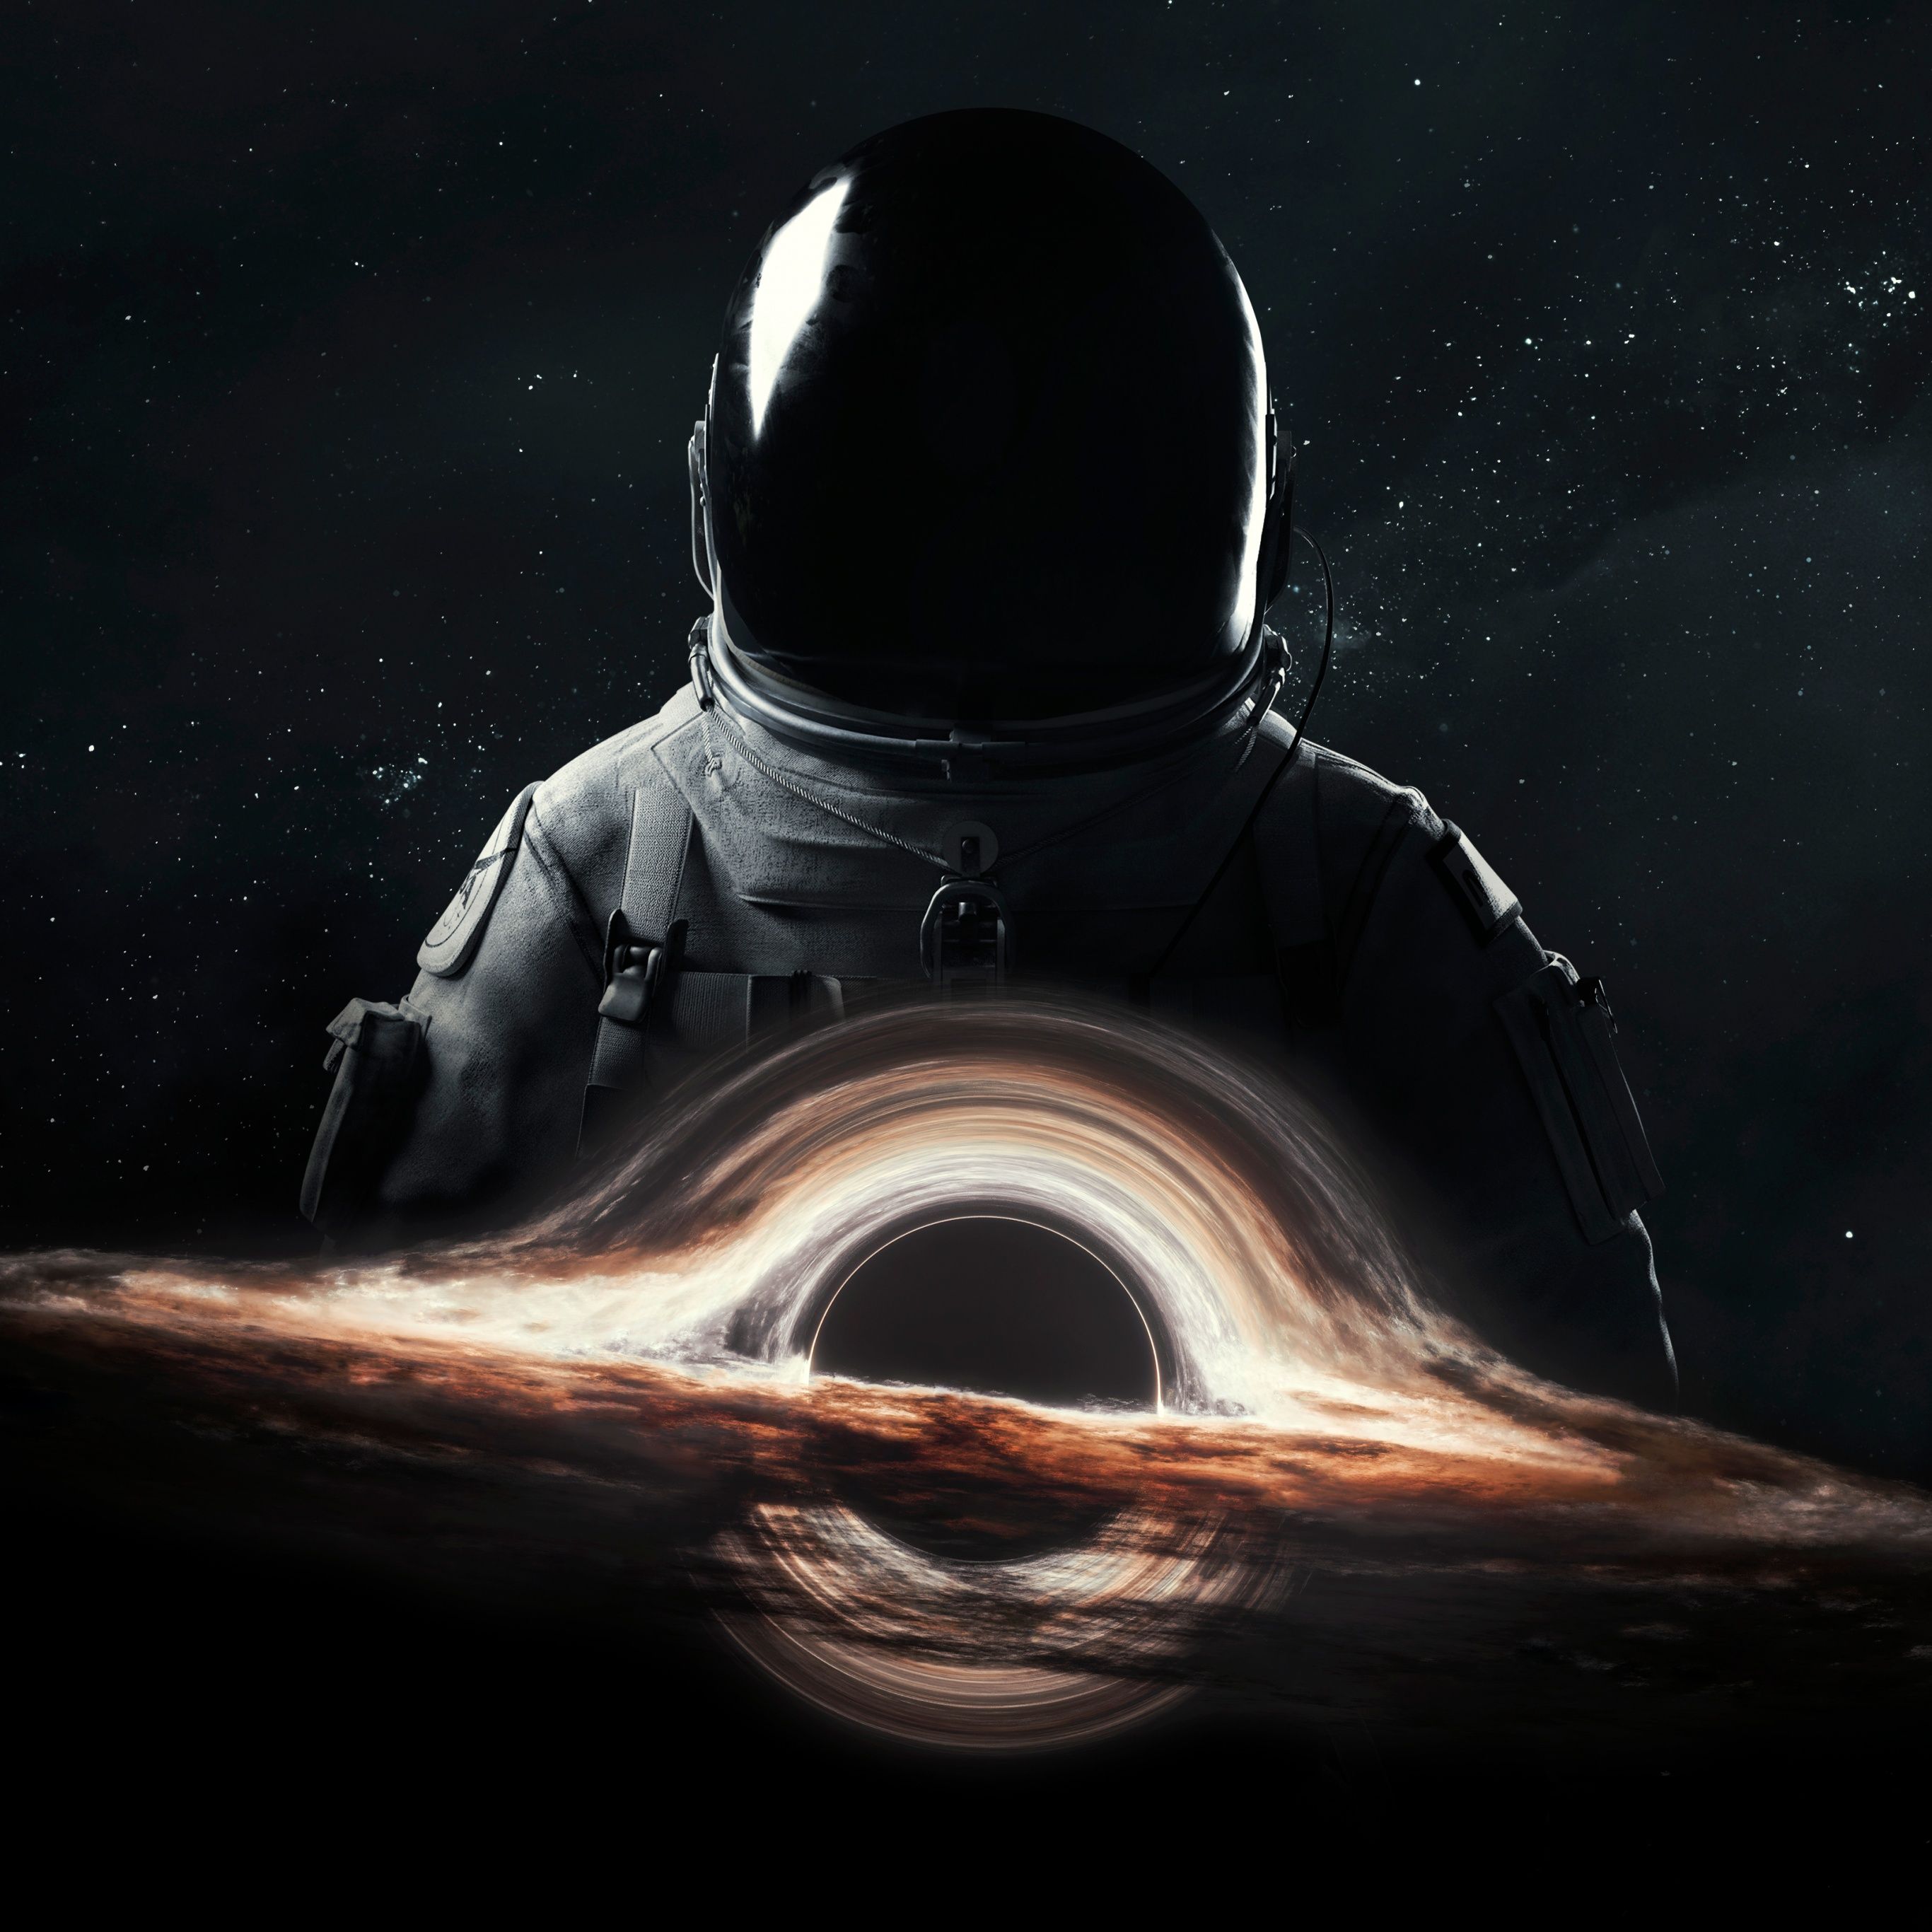 A man in an astronaut suit is looking at the black hole - Astronaut